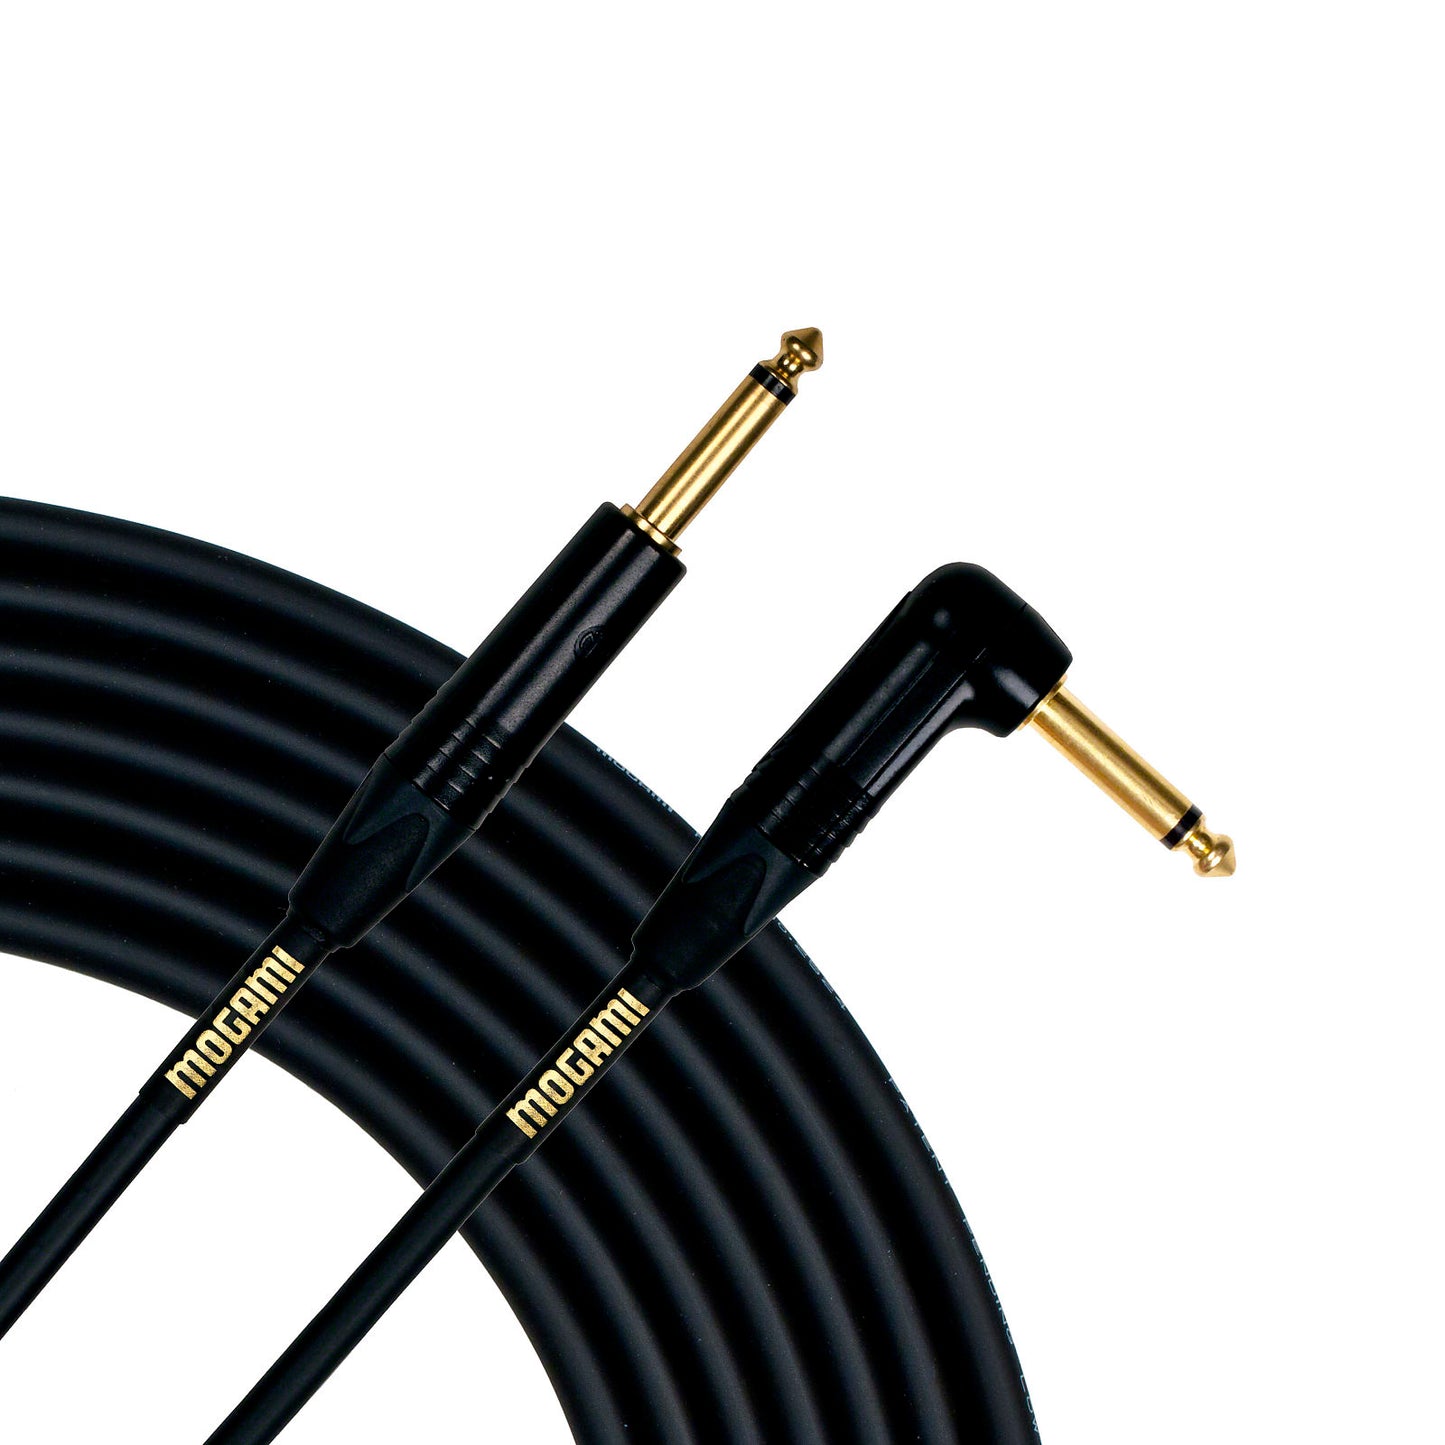 Mogami Gold Guitar/Instrument Cable (Straight to Right Angle End), 10 Foot